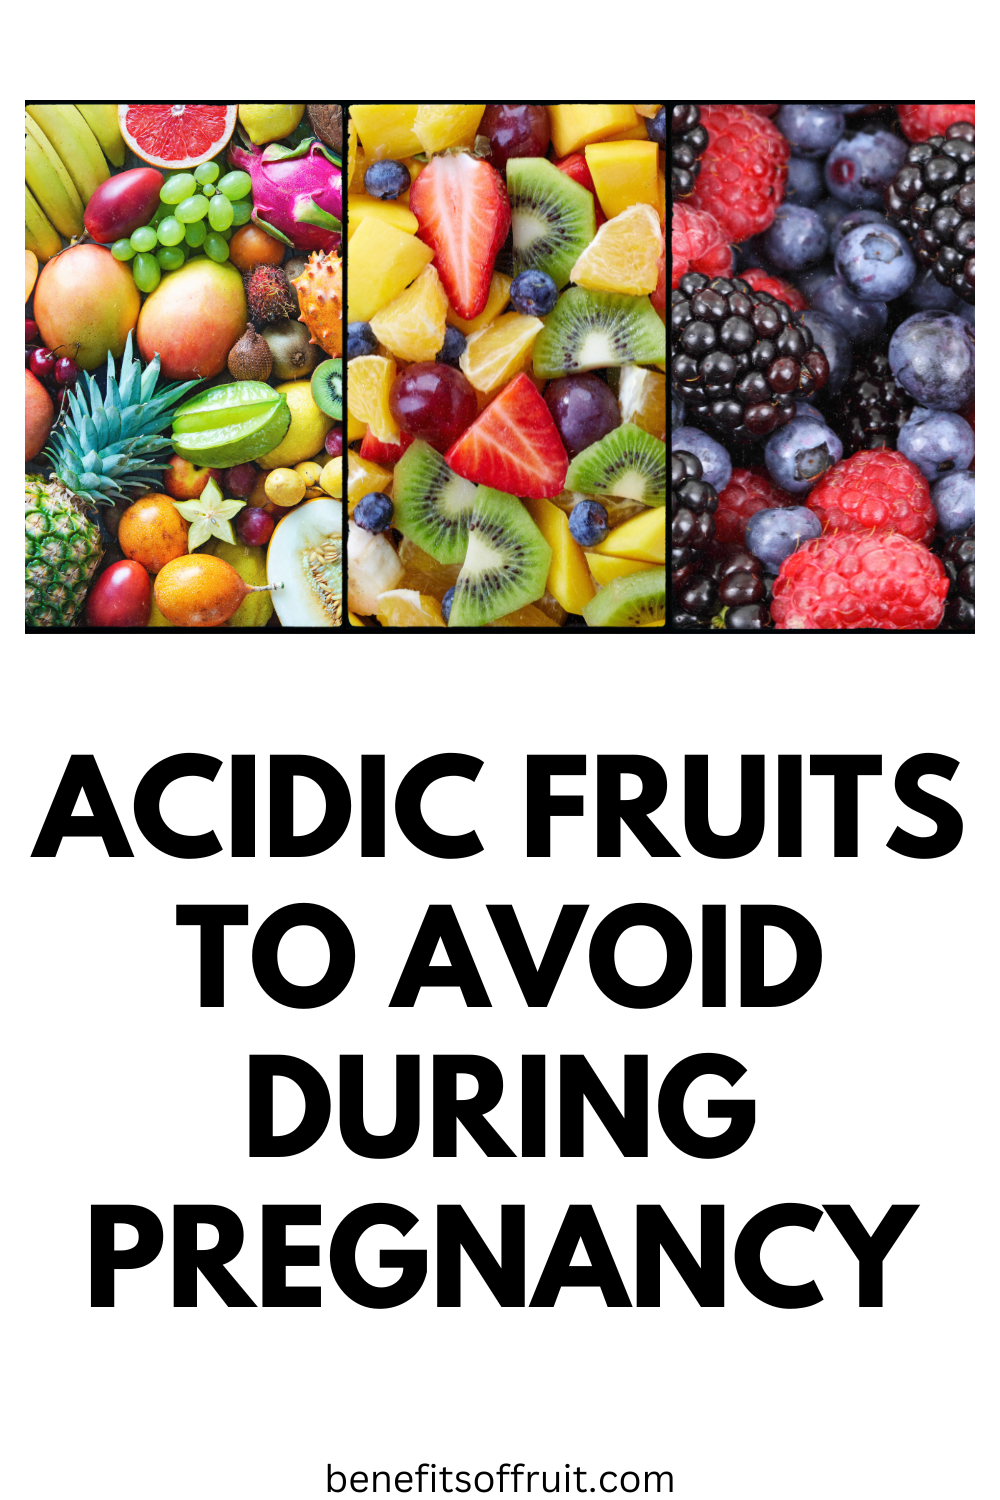 Acidic Fruits to Avoid During Pregnancy